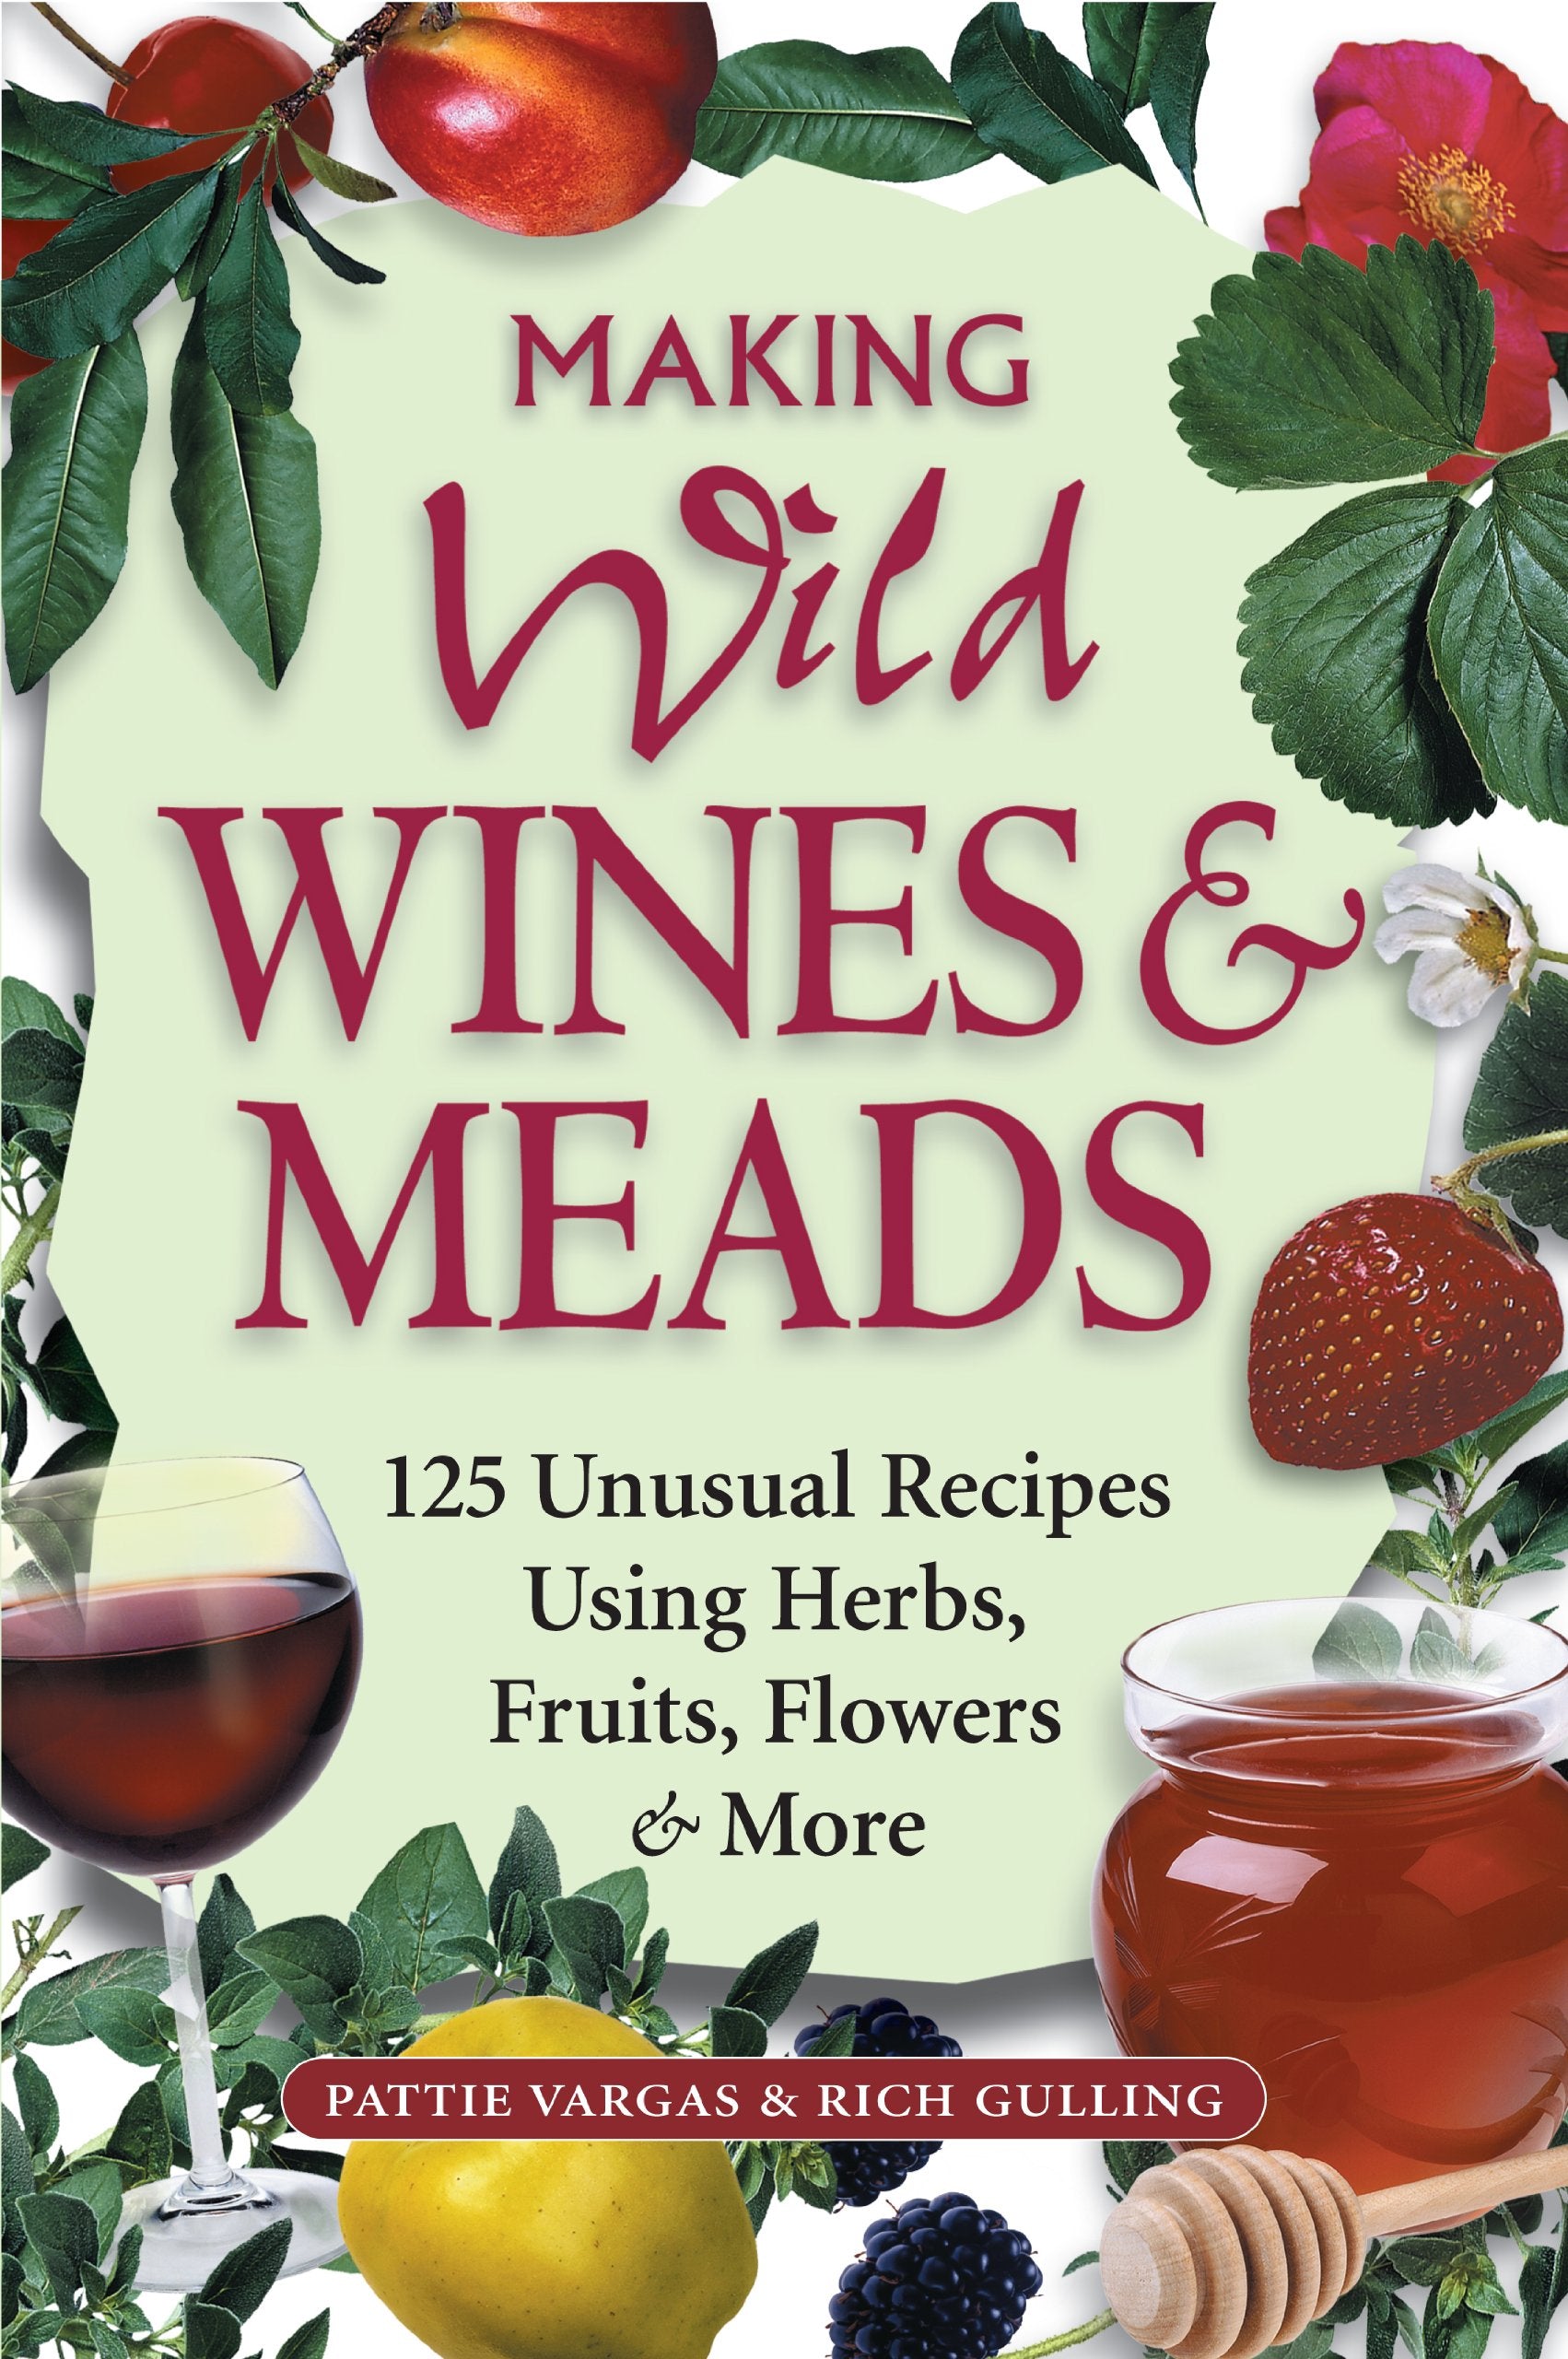 Making Wild Wines & Meads: 125 Unusual Recipes Using Herbs, Fruits, Flowers & More (Pattie Vargas, Rich Gulling)